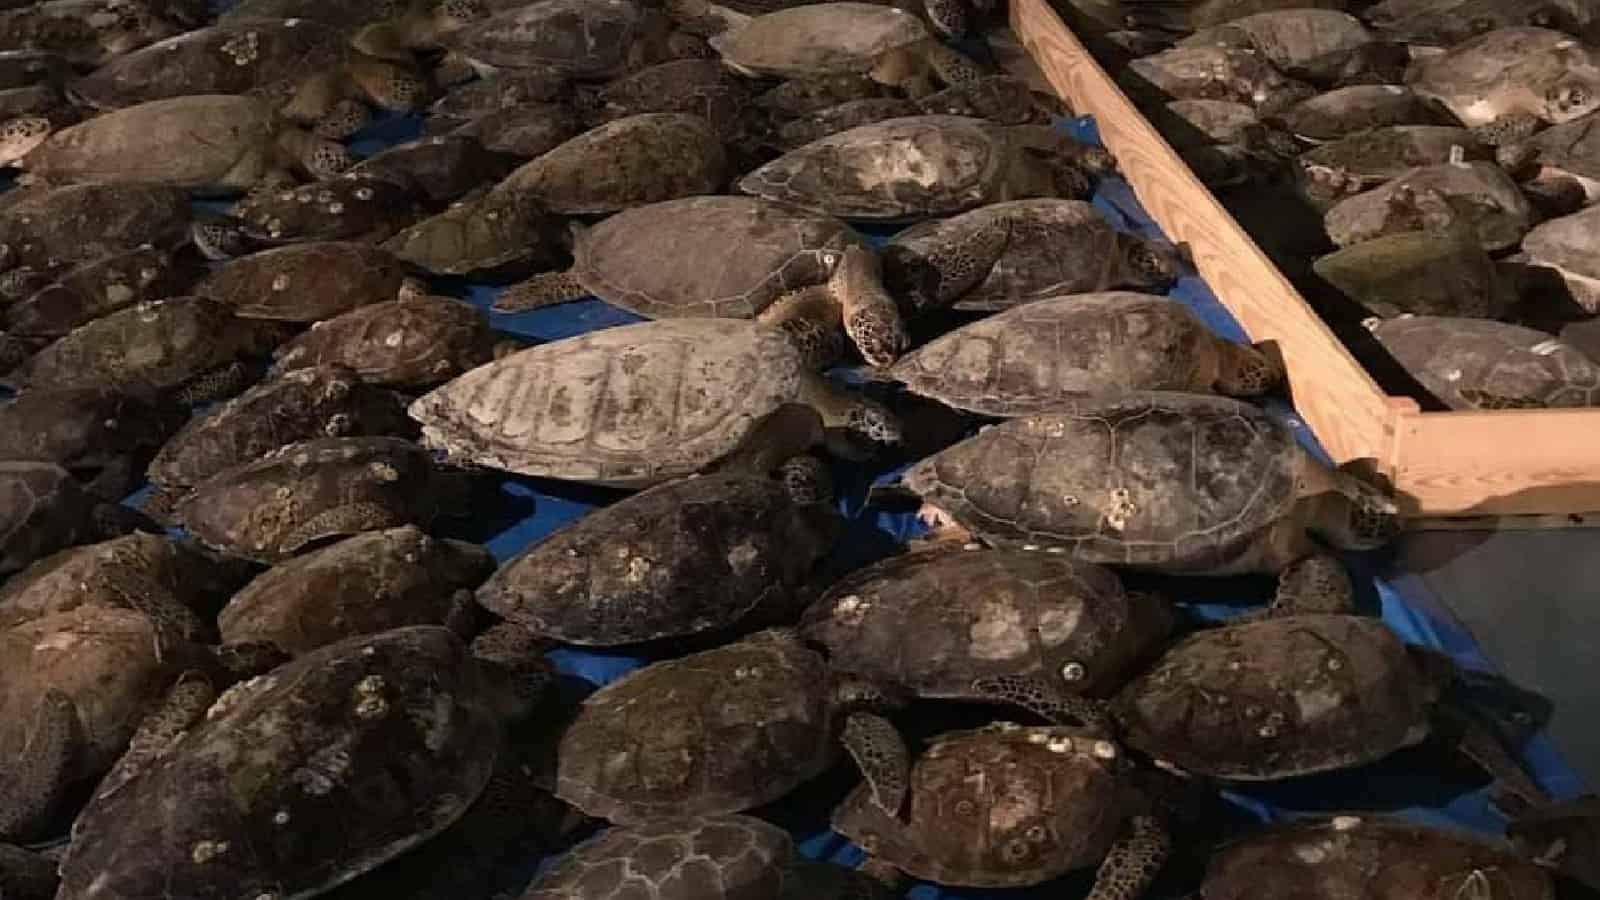 Volunteers Save Thousands of Sea Turtles from Winter Storm in Texas